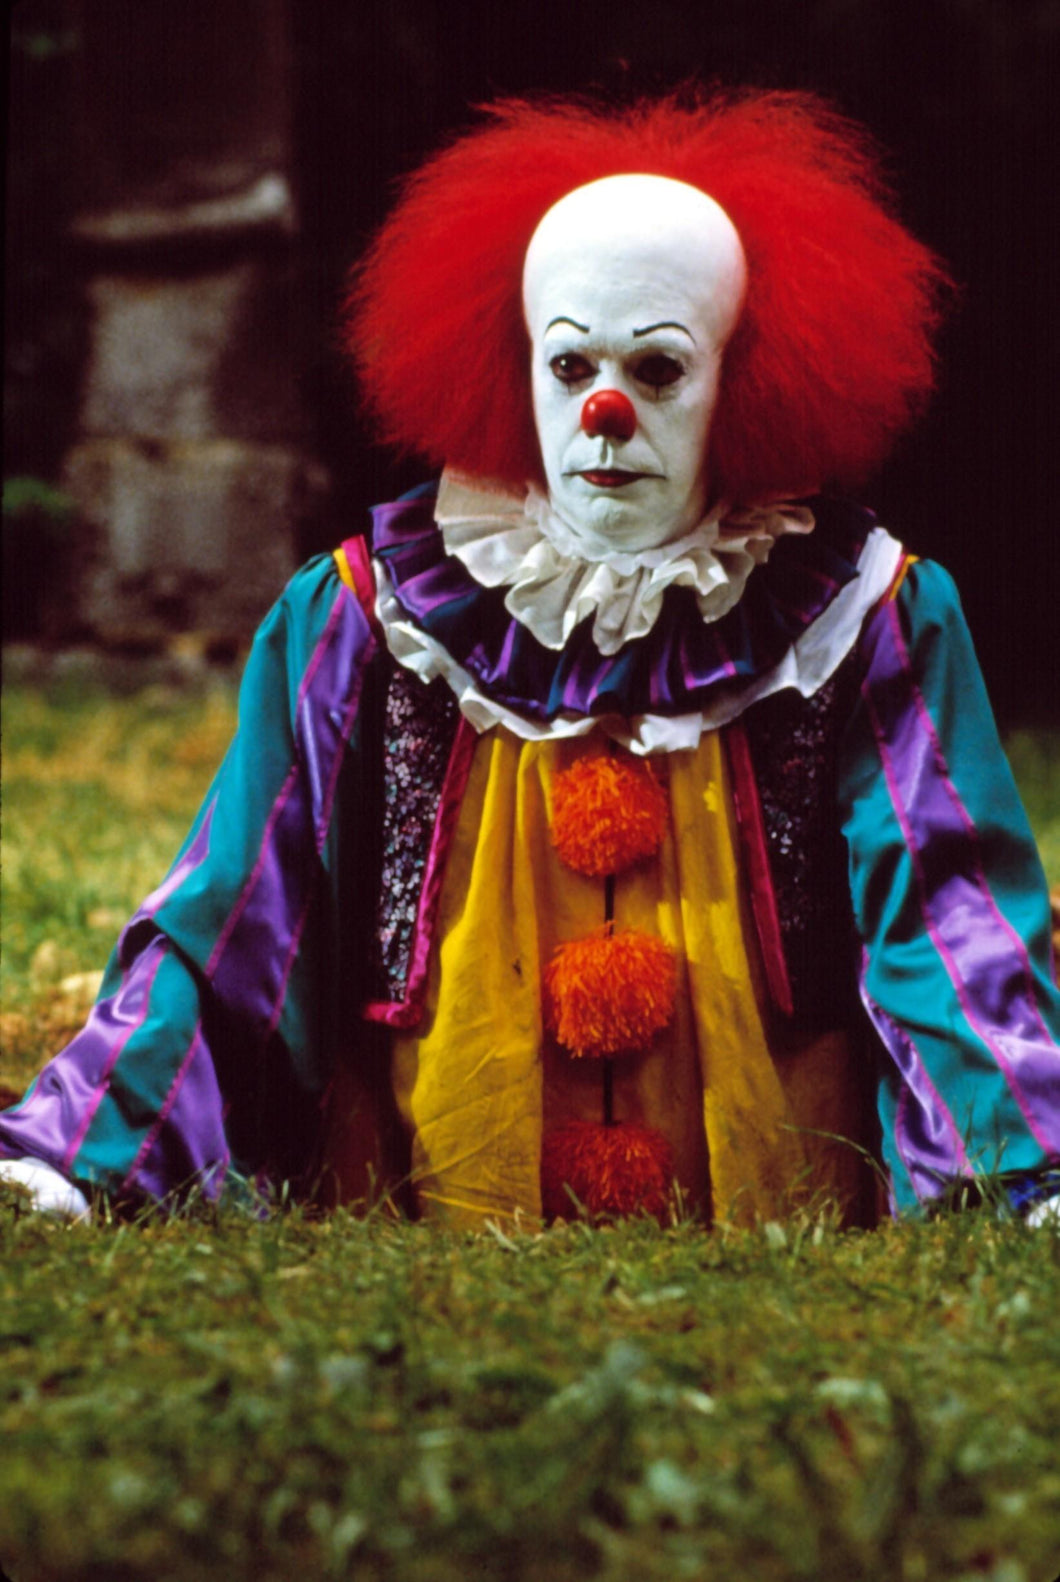 Tim Curry - Signed IT Pennywise the Dancing Clown #1 (8x10)